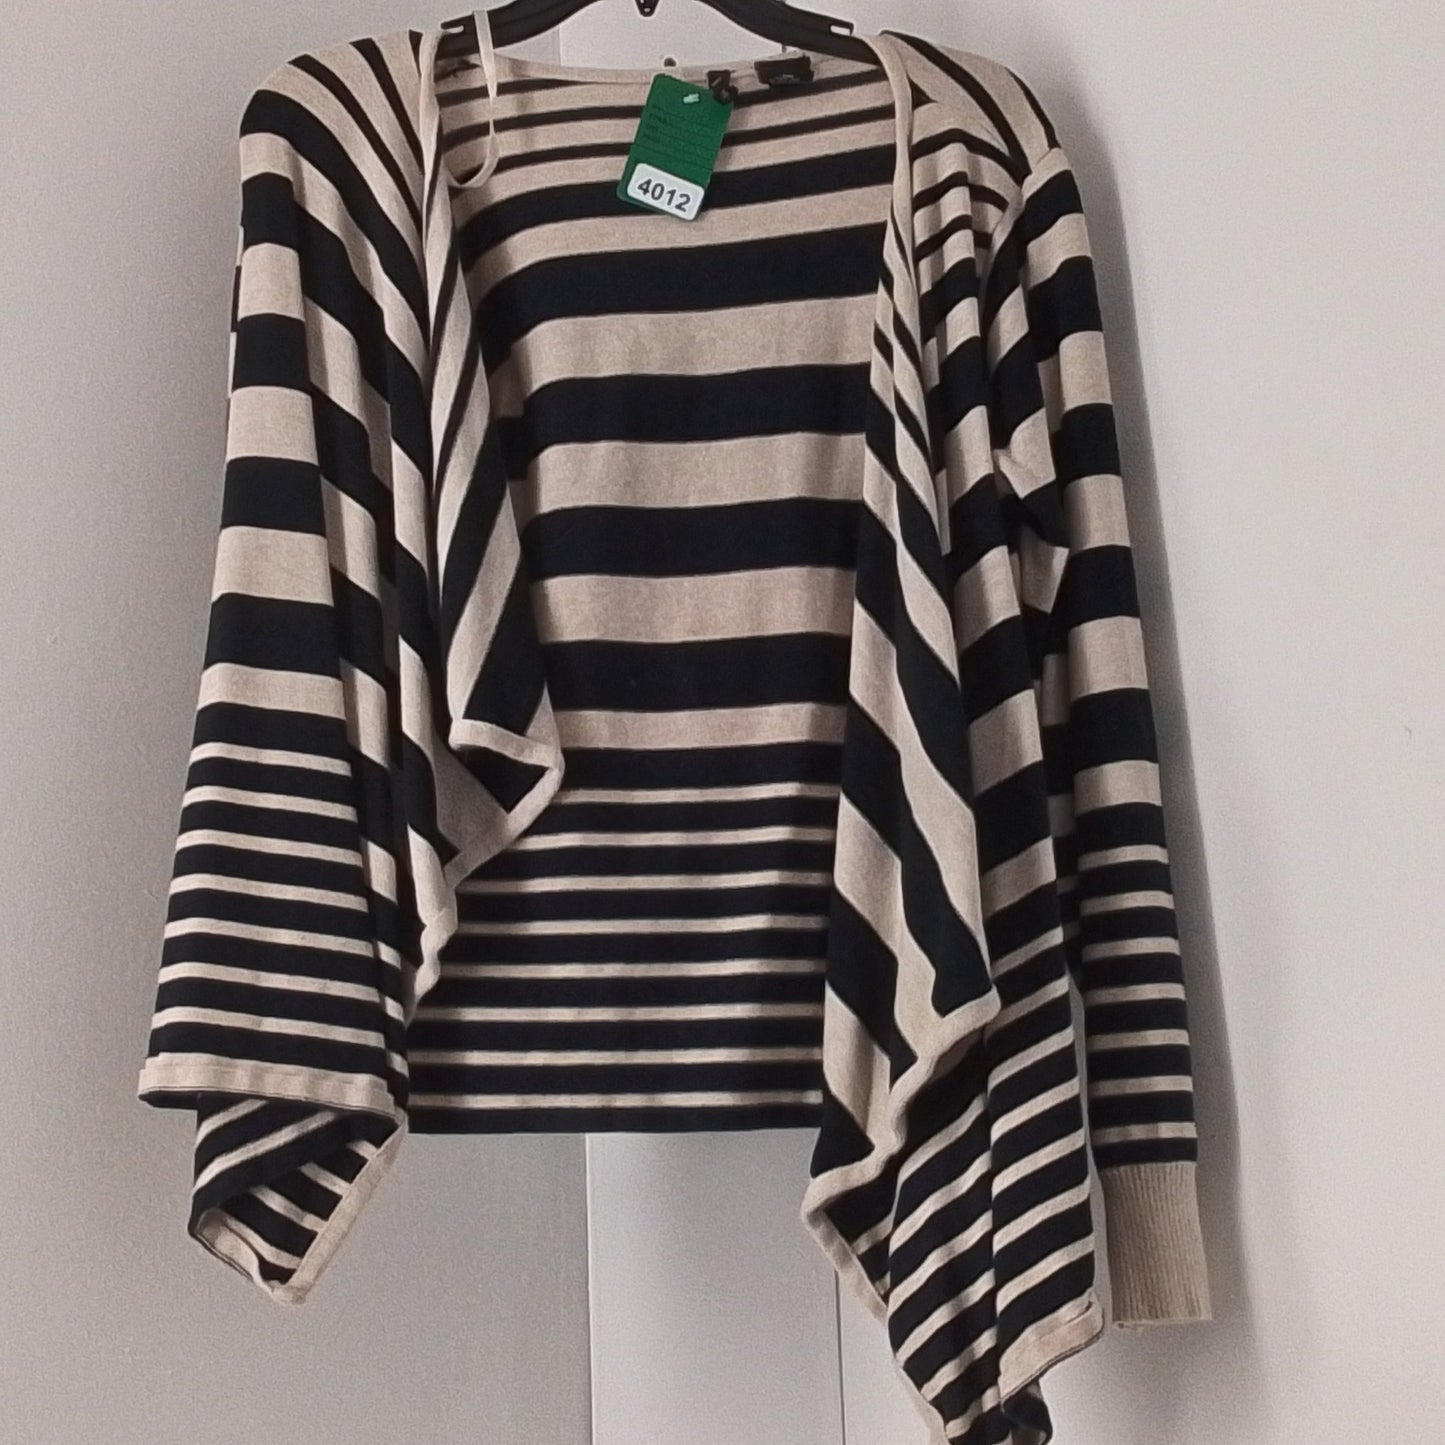 New Directions Beige Cardigan With Black Stripes